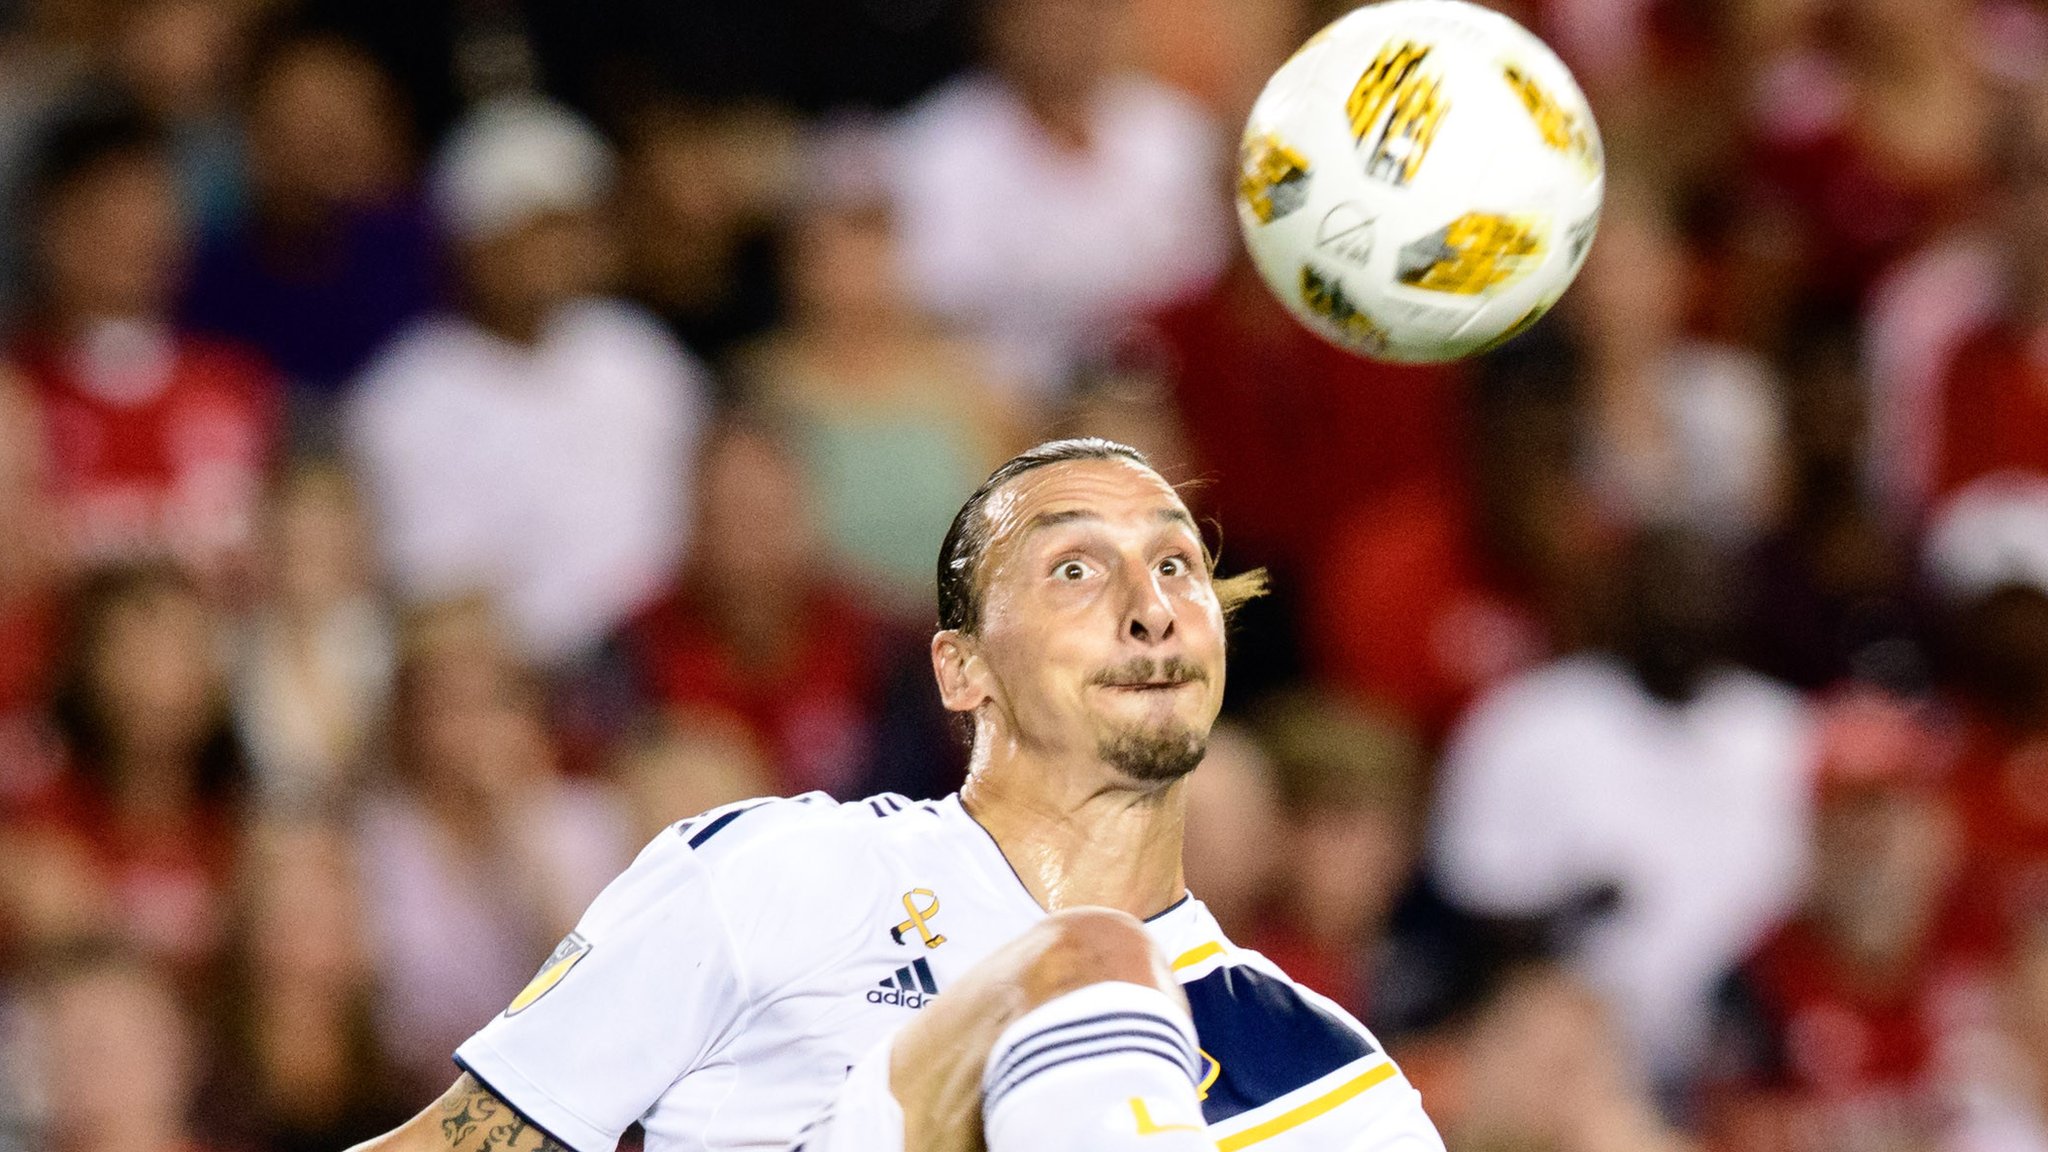 'I'm happy for Toronto because they'll be remembered as my 500th victim' - Zlatan on landmark goal